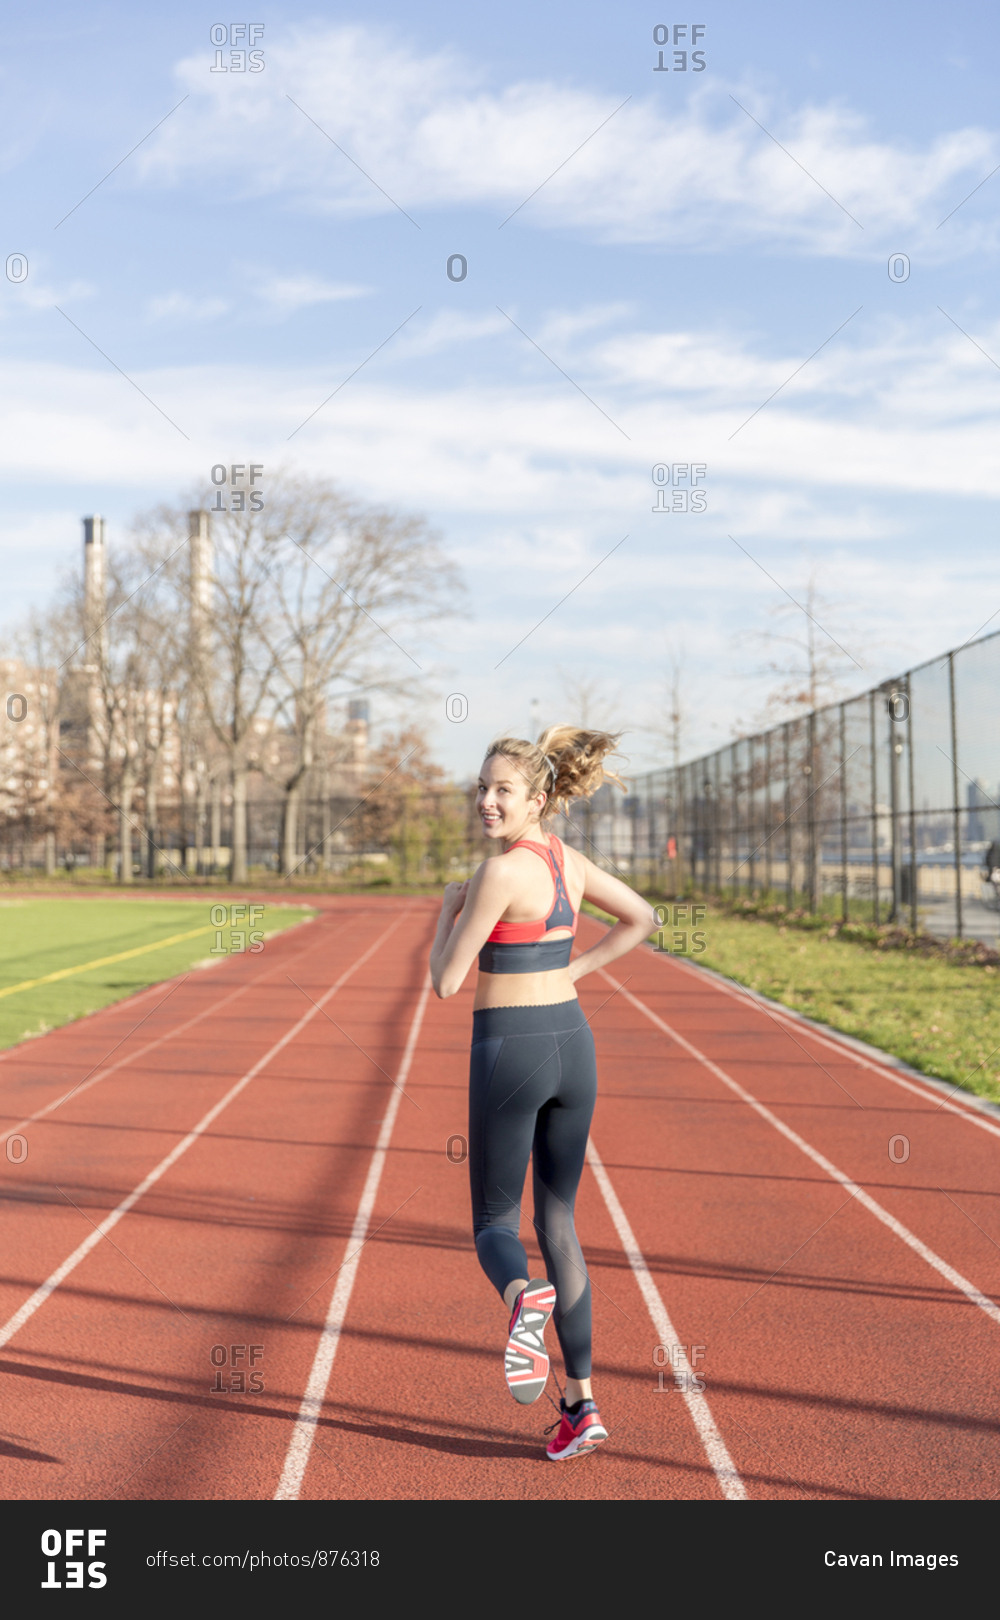 Portrait of athlete running on sports track against sky